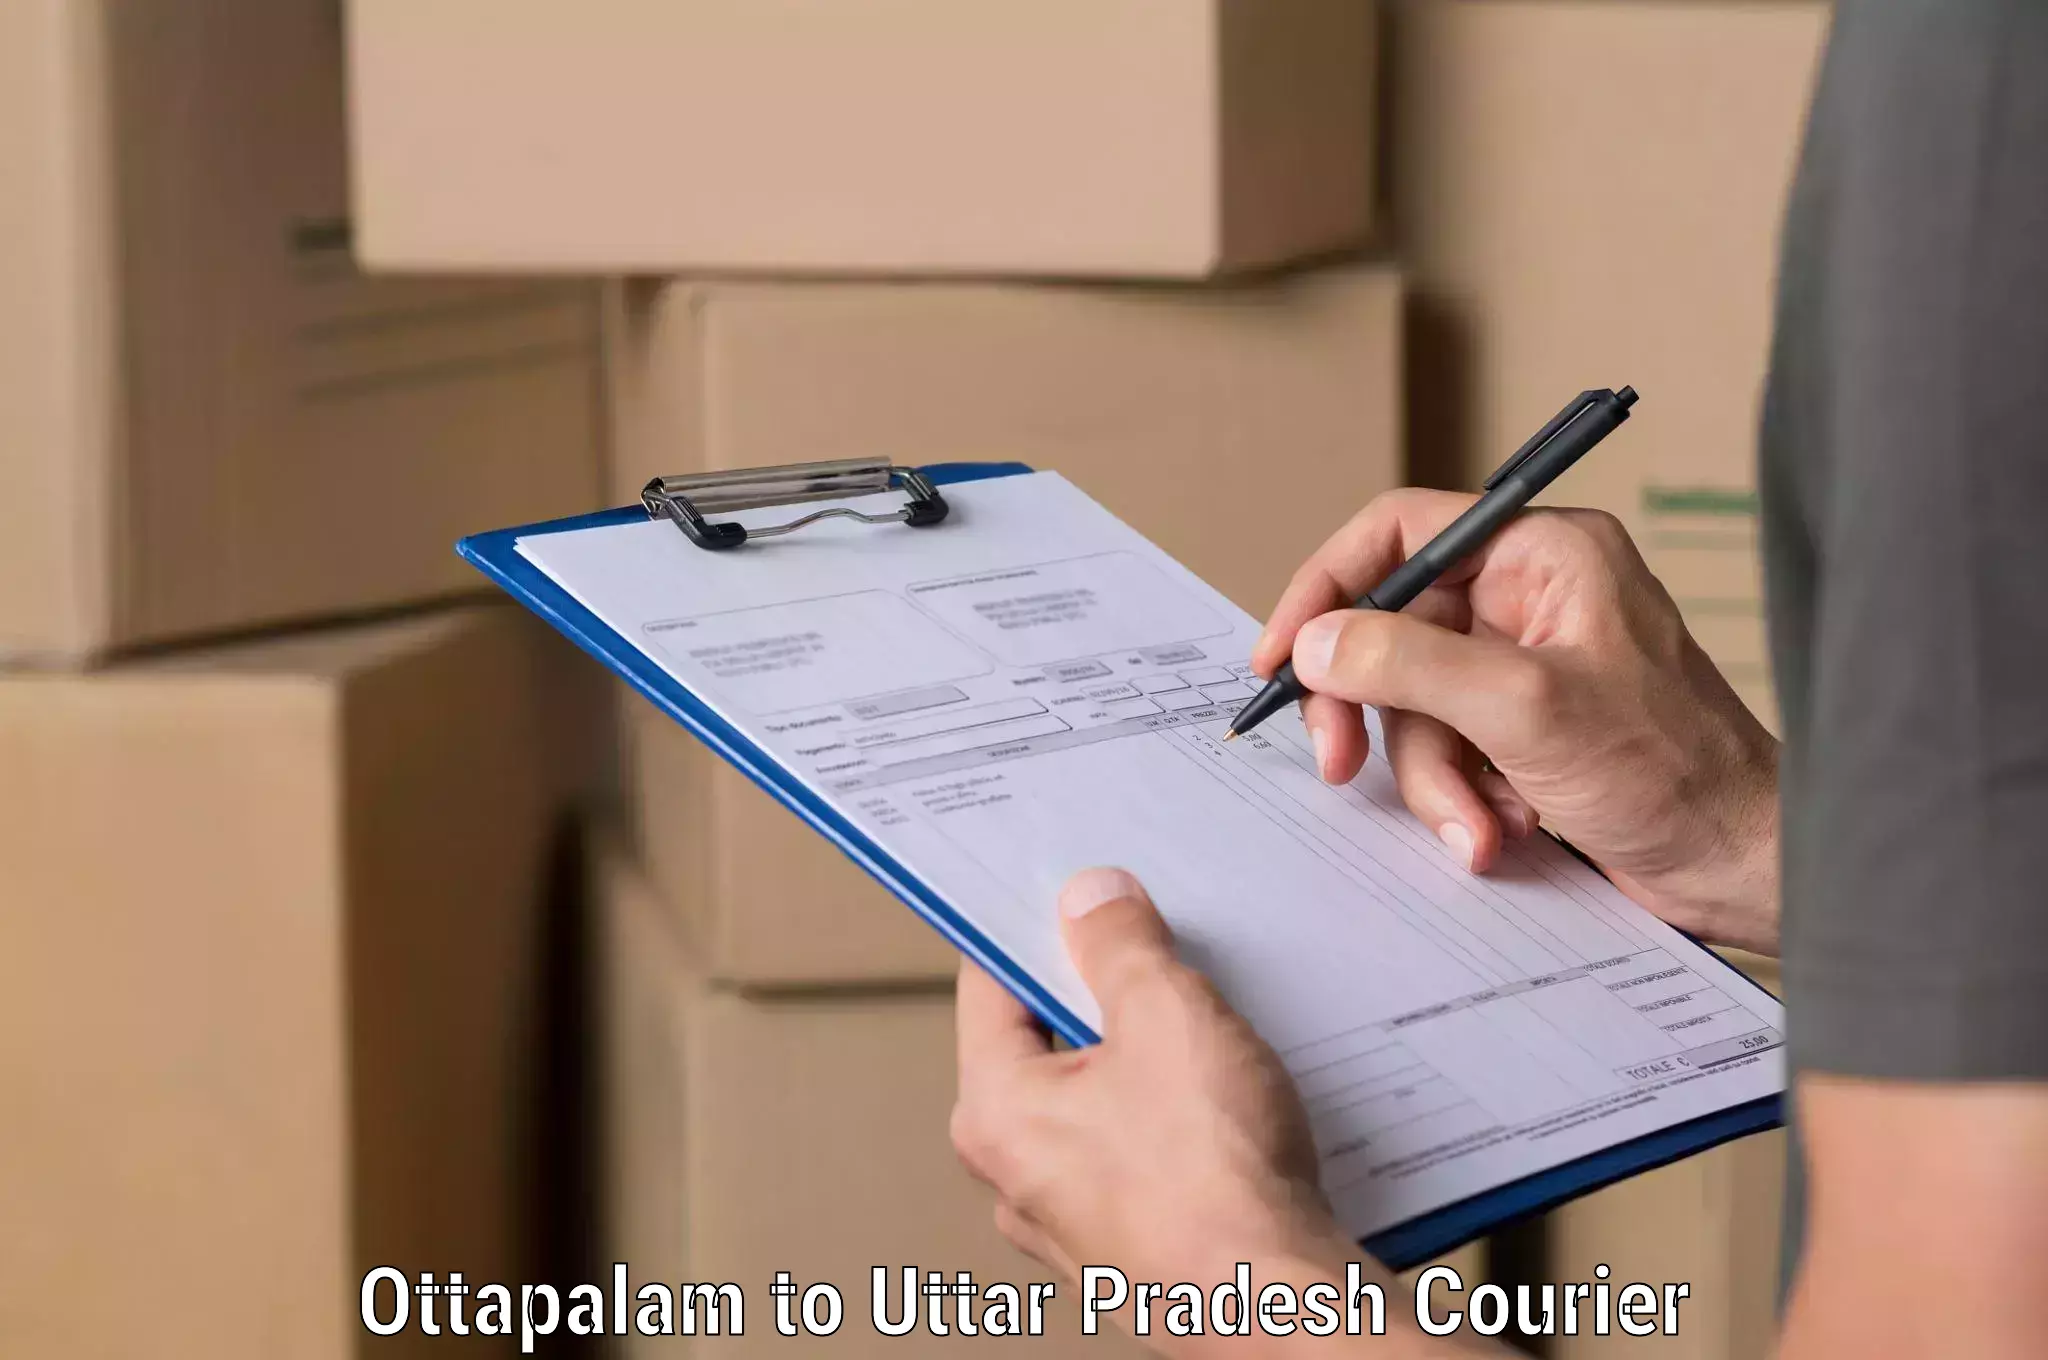 Pharmaceutical courier Ottapalam to Khutar